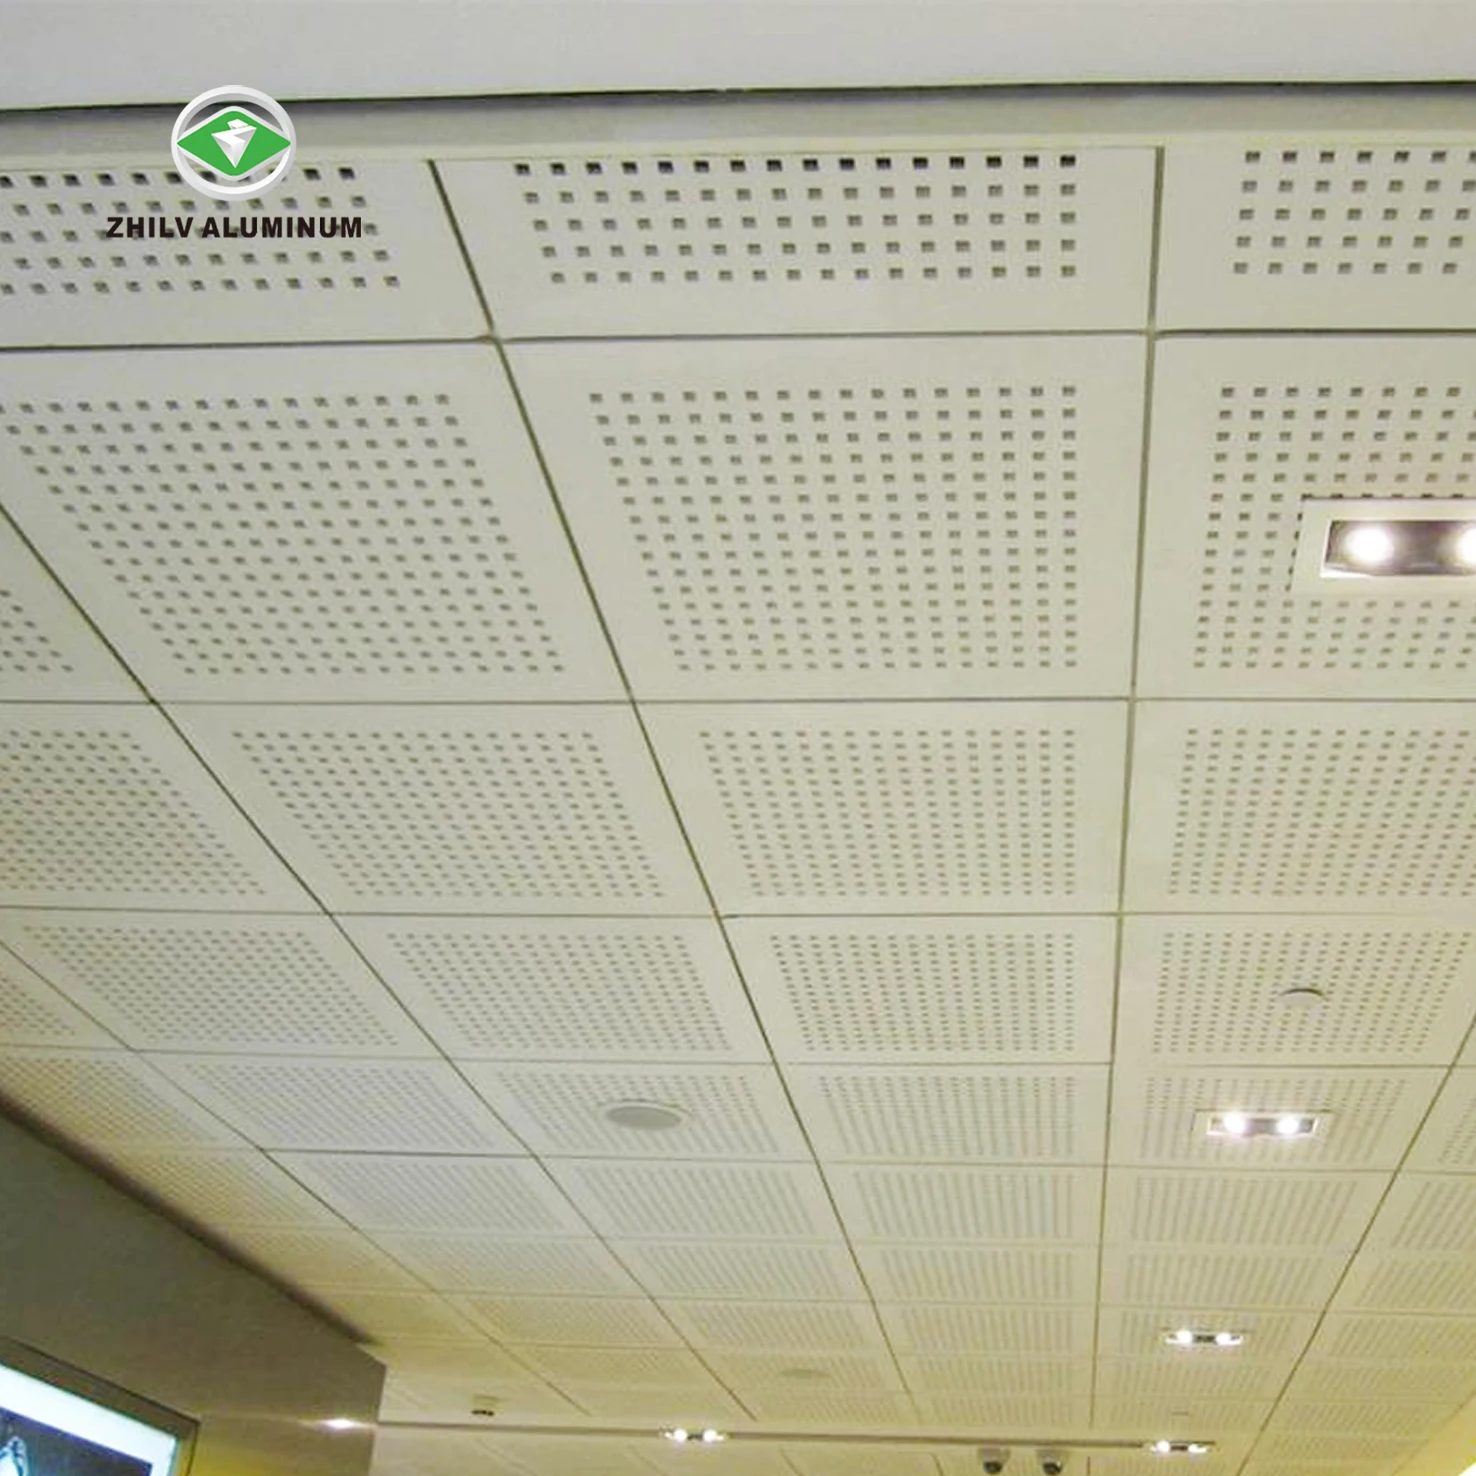 Fashional Rust Proof New Vinyl Drop Ceiling Tiles Buy Office Ceiling Tiles Metal Ceiling Tiles New Ceiling Tiles Product On Alibaba Com